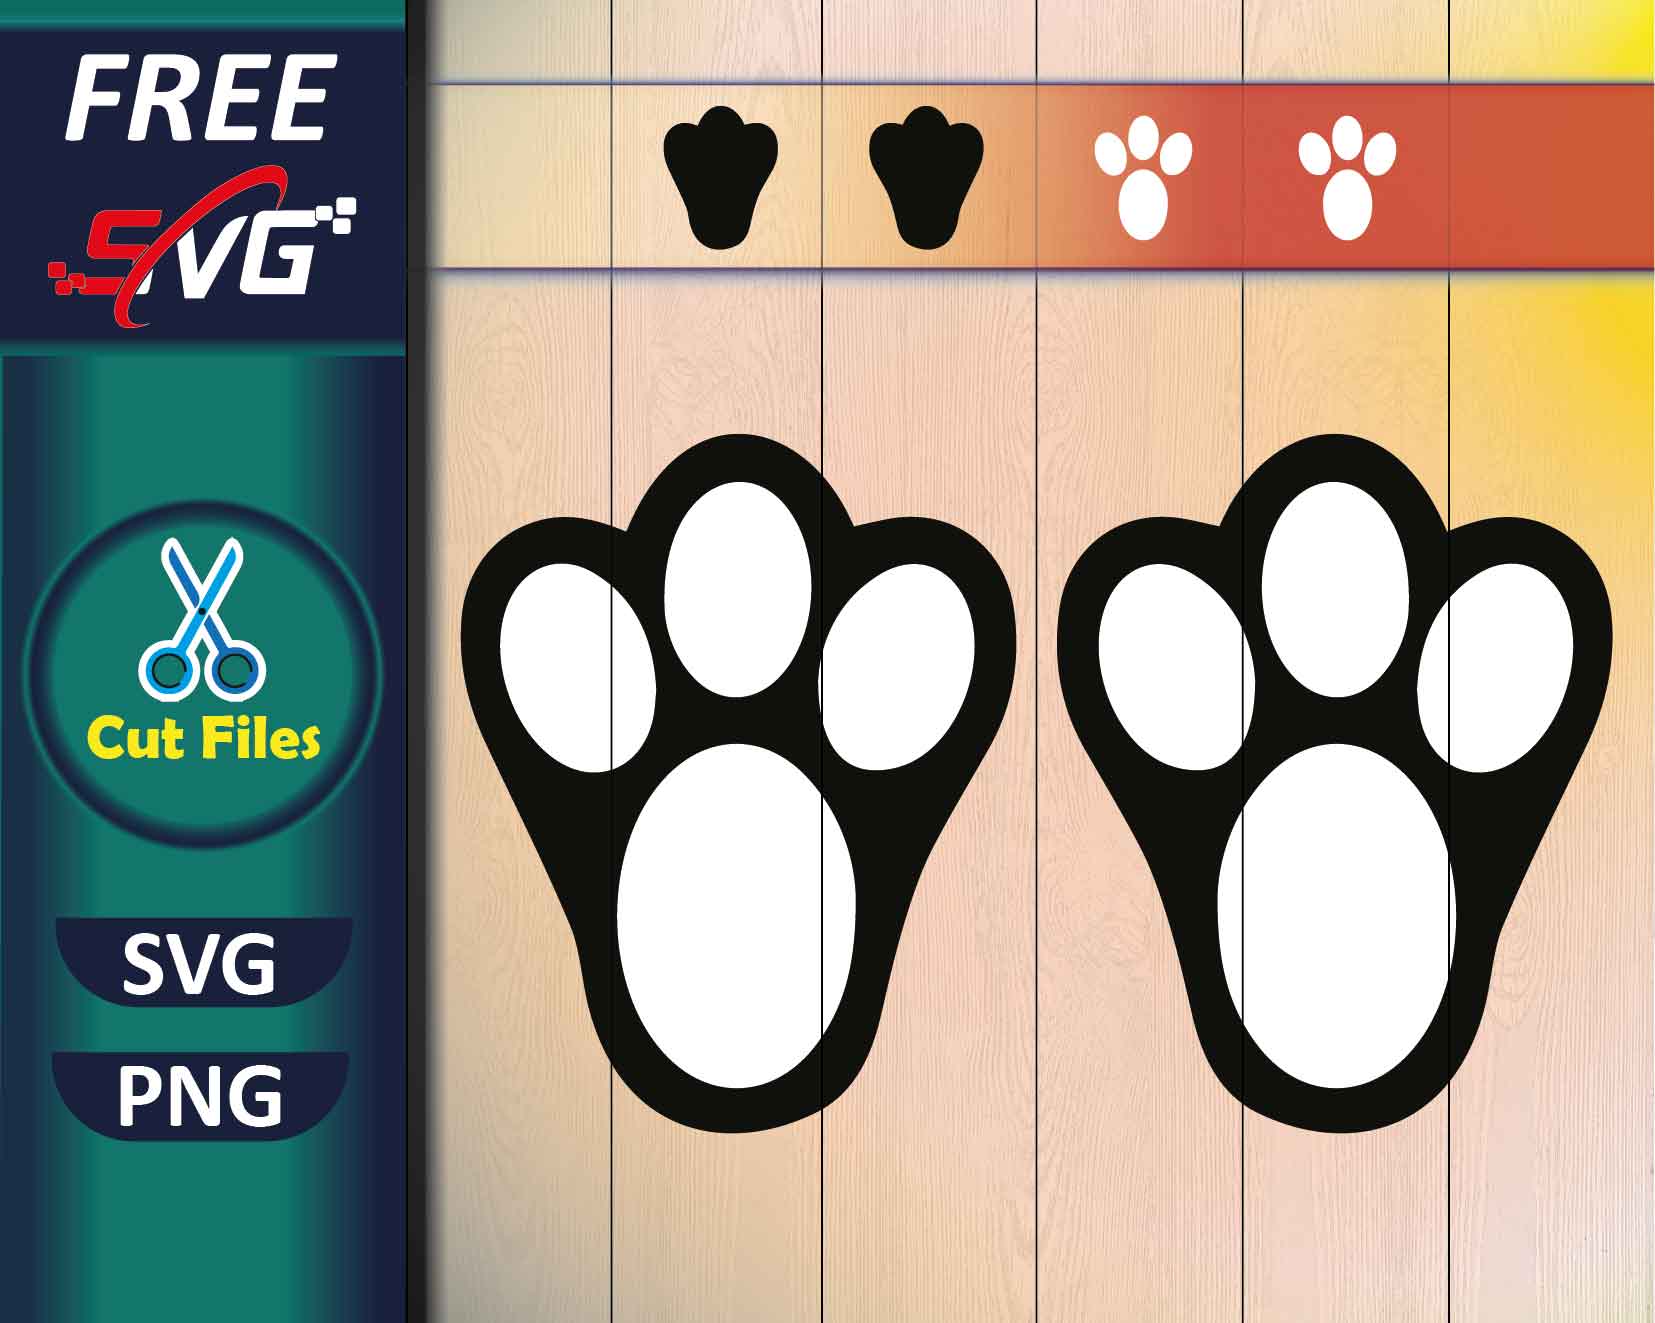 Bunny Feet SVG Free Download - Free SVG Cut Files